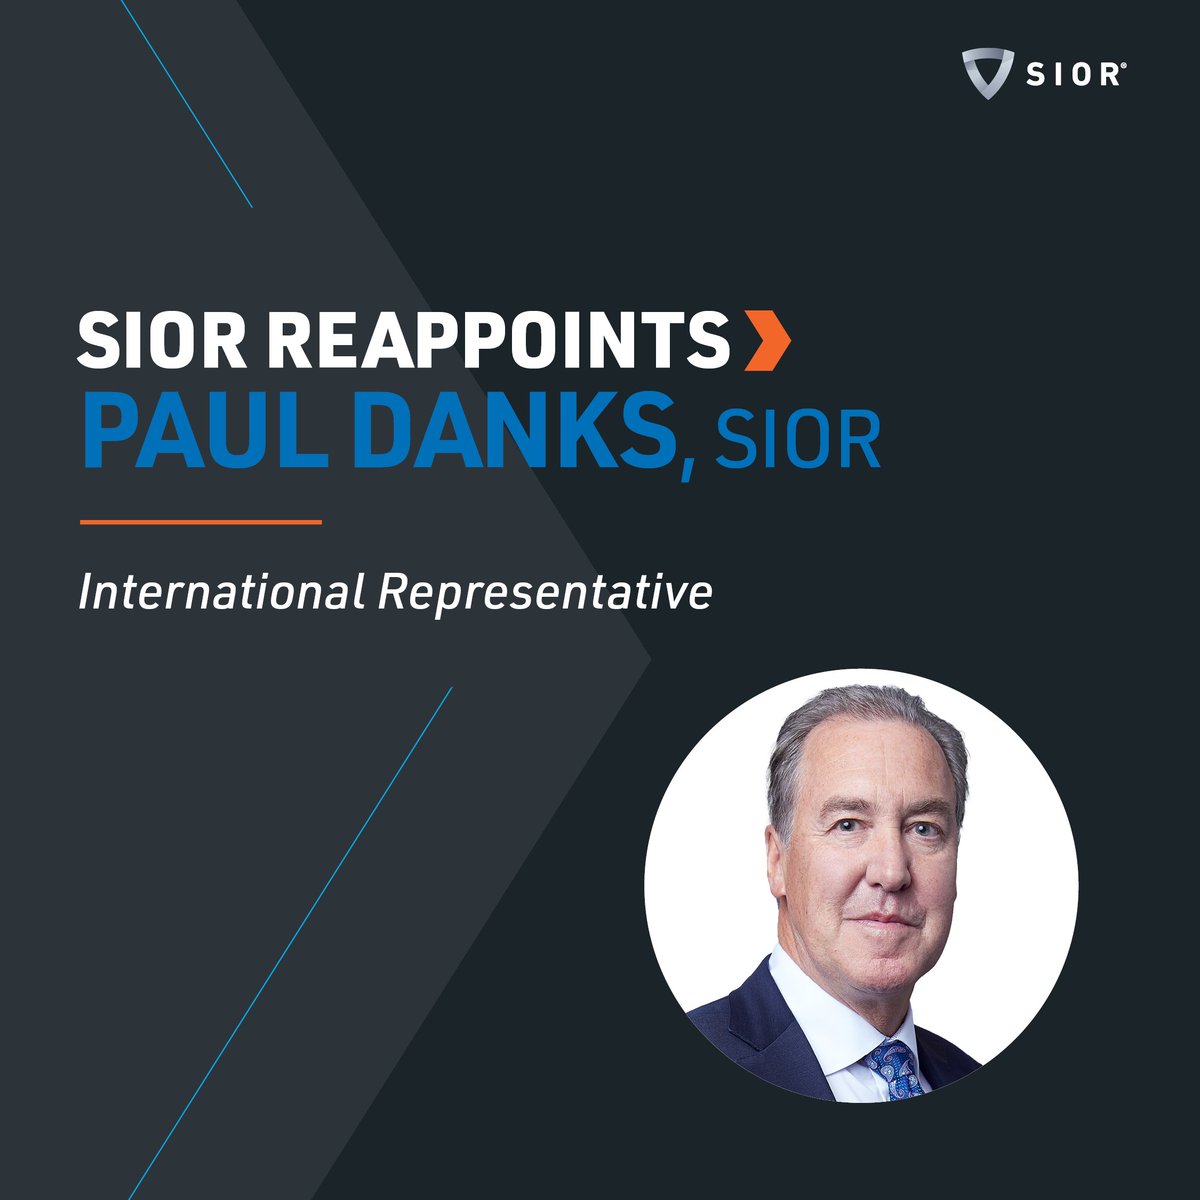 We're excited to announce the reappointment of Paul Danks, SIOR, as International Representative for the #SIOR Board of Directors! Paul has carried the torch for this role spectacularly, so we know this position will continue to be in great hands. Congratulations!